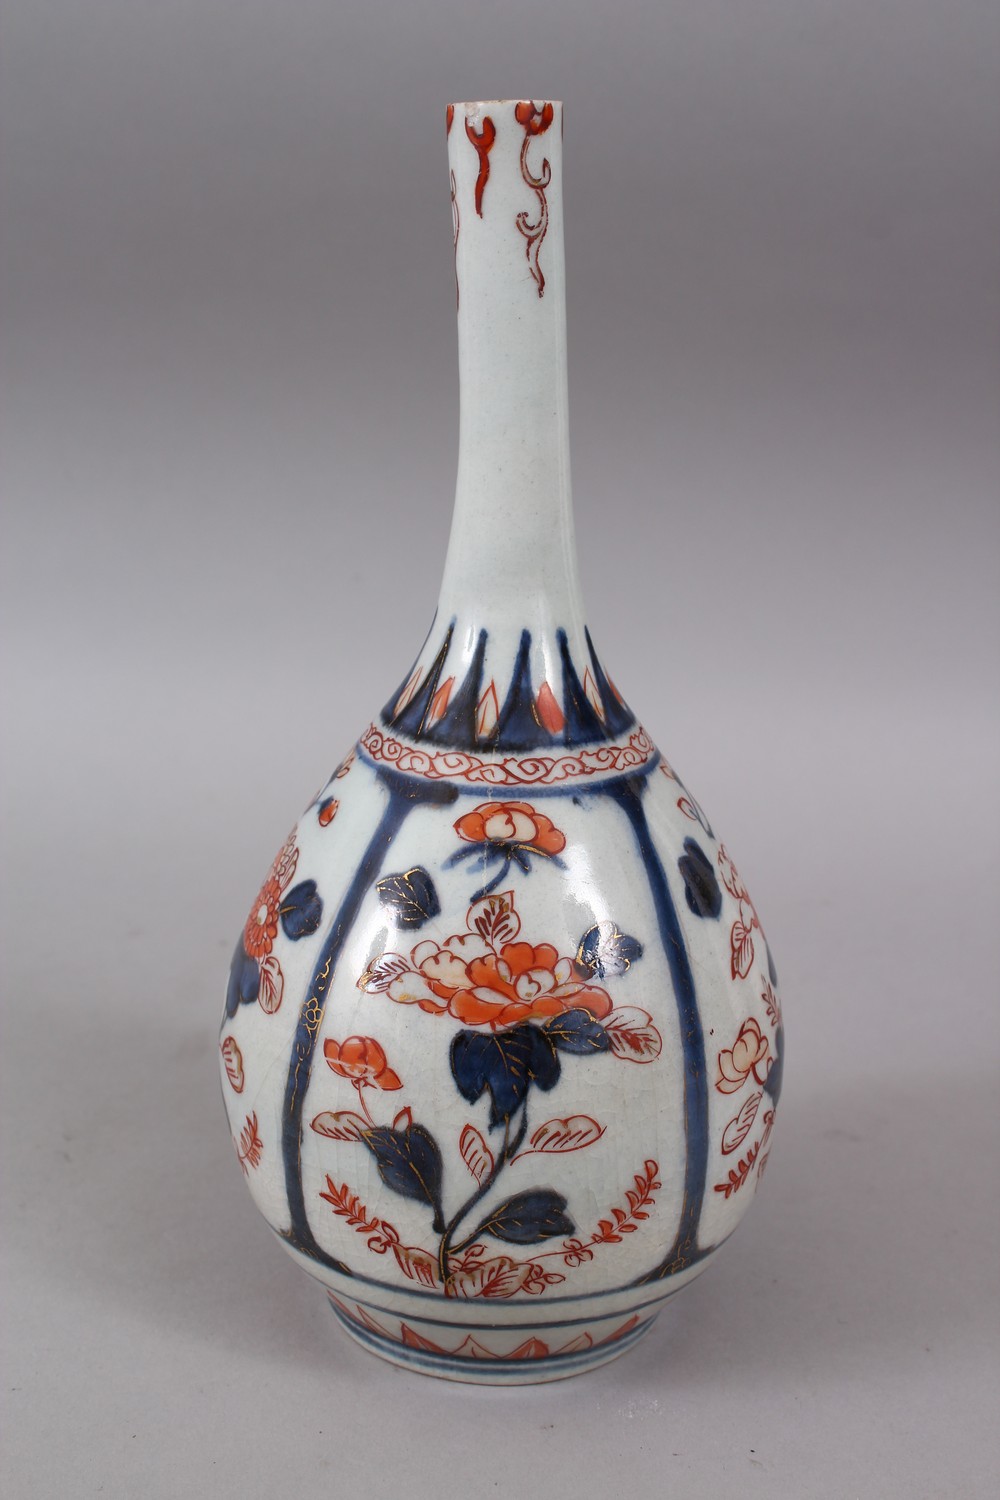 A GOOD JAPANESE EDO PERIOD IMARI PORCELAIN BOTTLE VASE, with panels of floral display with gilt - Image 3 of 8